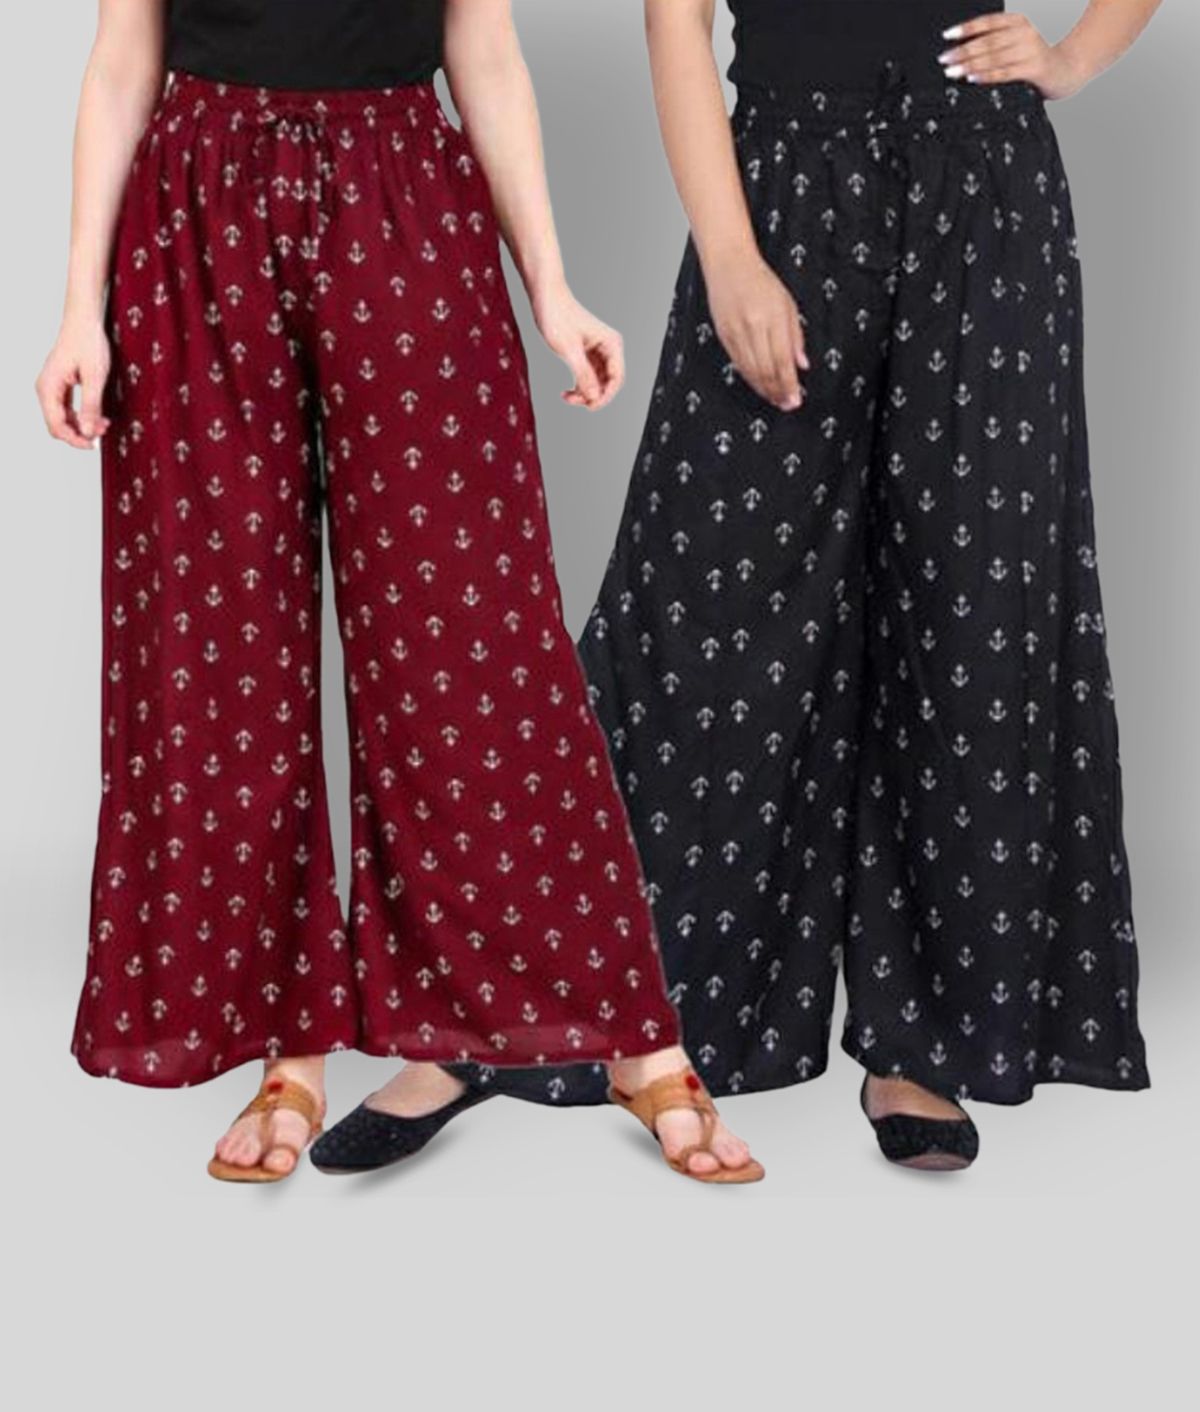     			BHARTI CREATION - Multicolor Rayon Flared Women's Palazzos ( Pack of 2 )